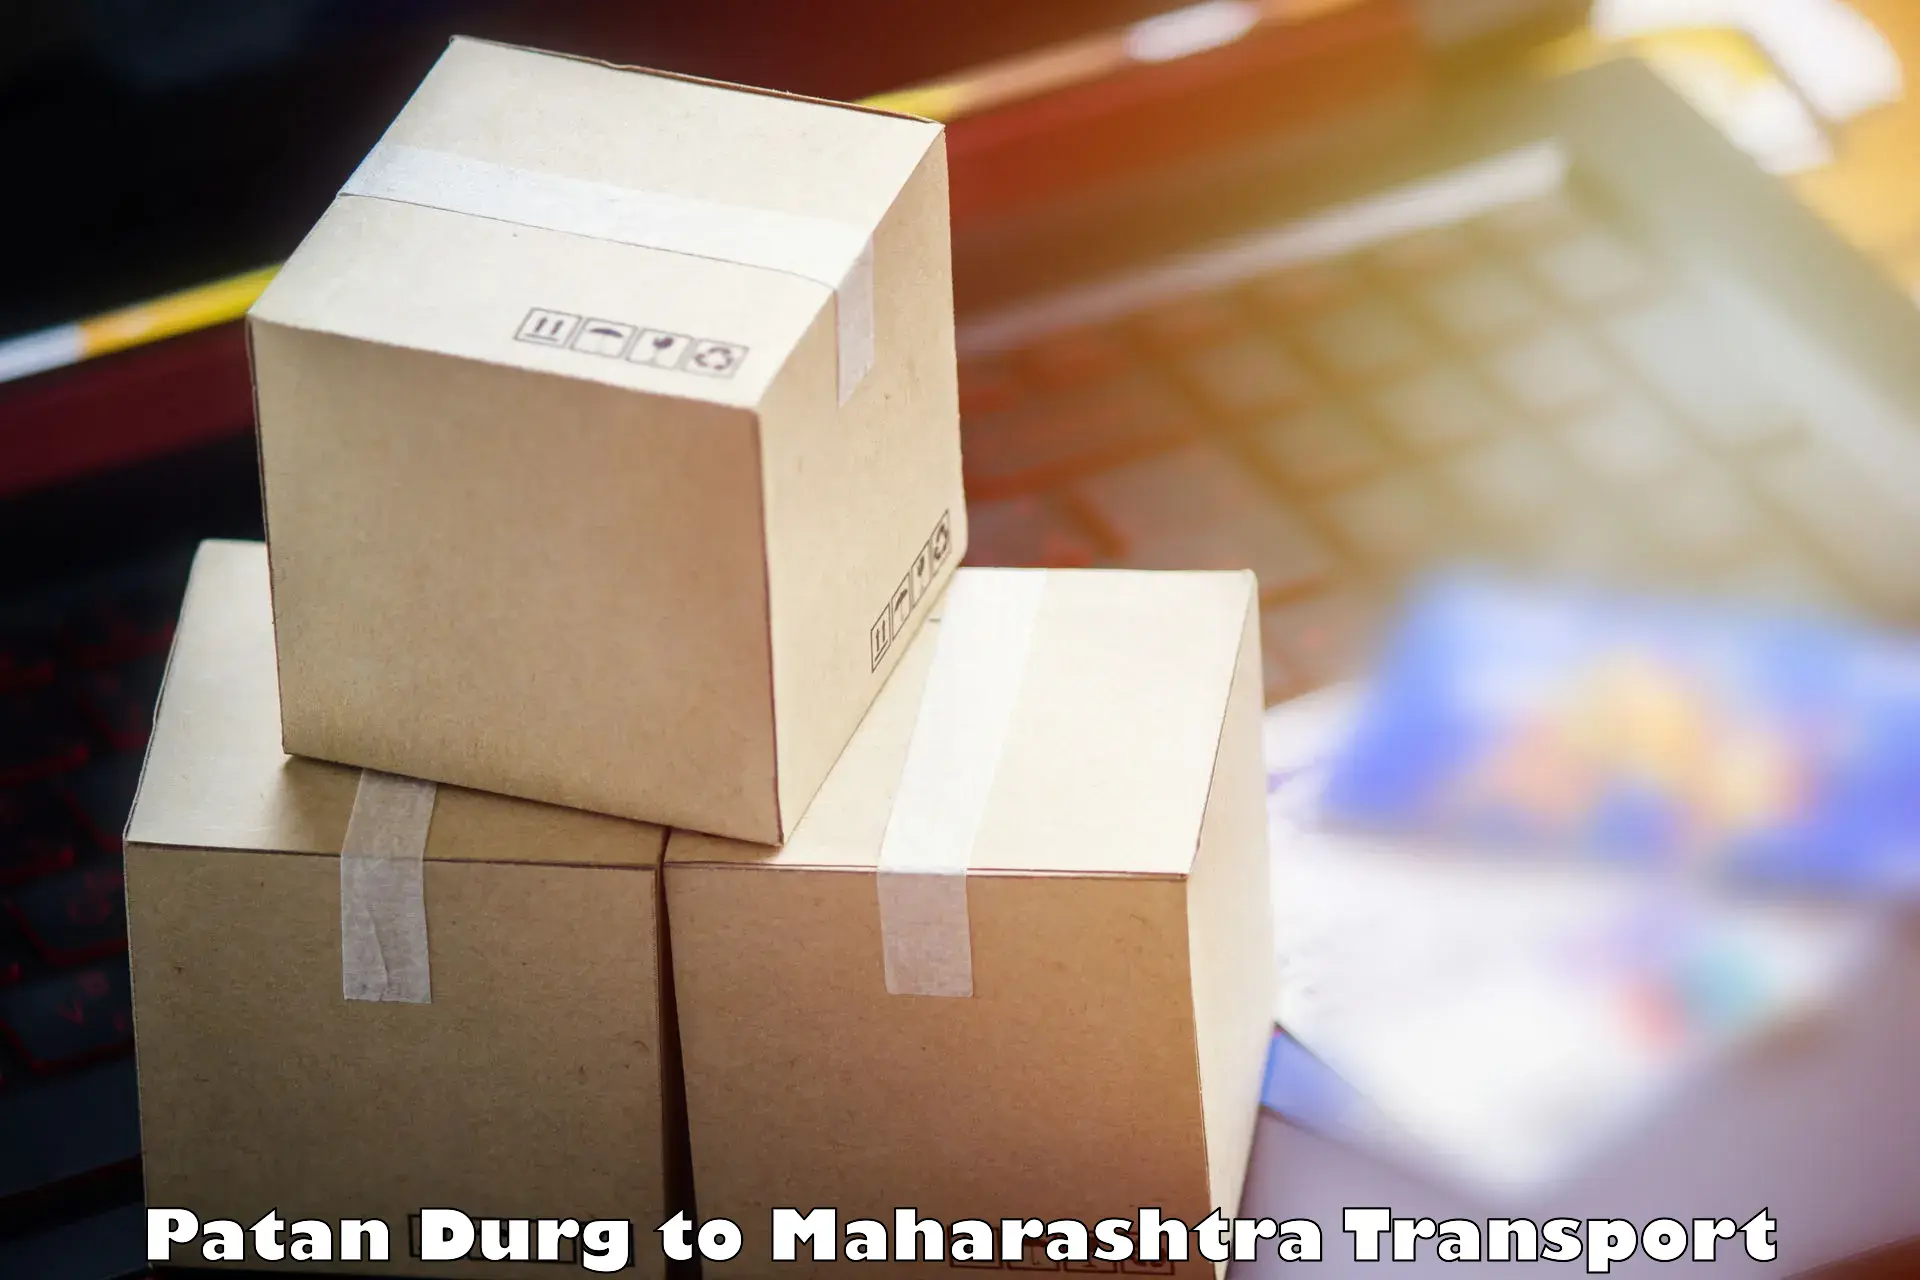 Truck transport companies in India Patan Durg to Ojhar